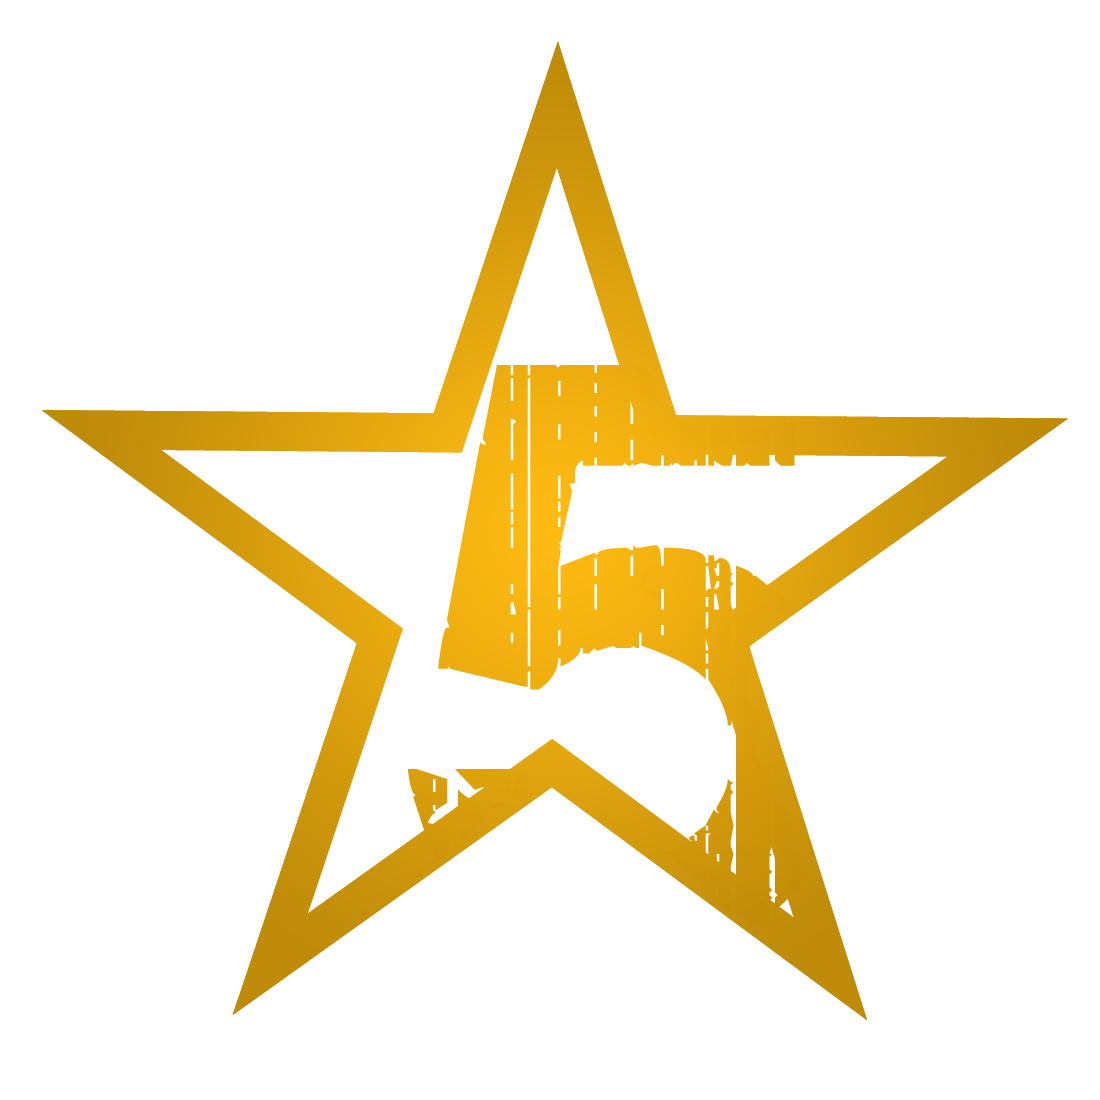 5 Star Images - ClipArt Best